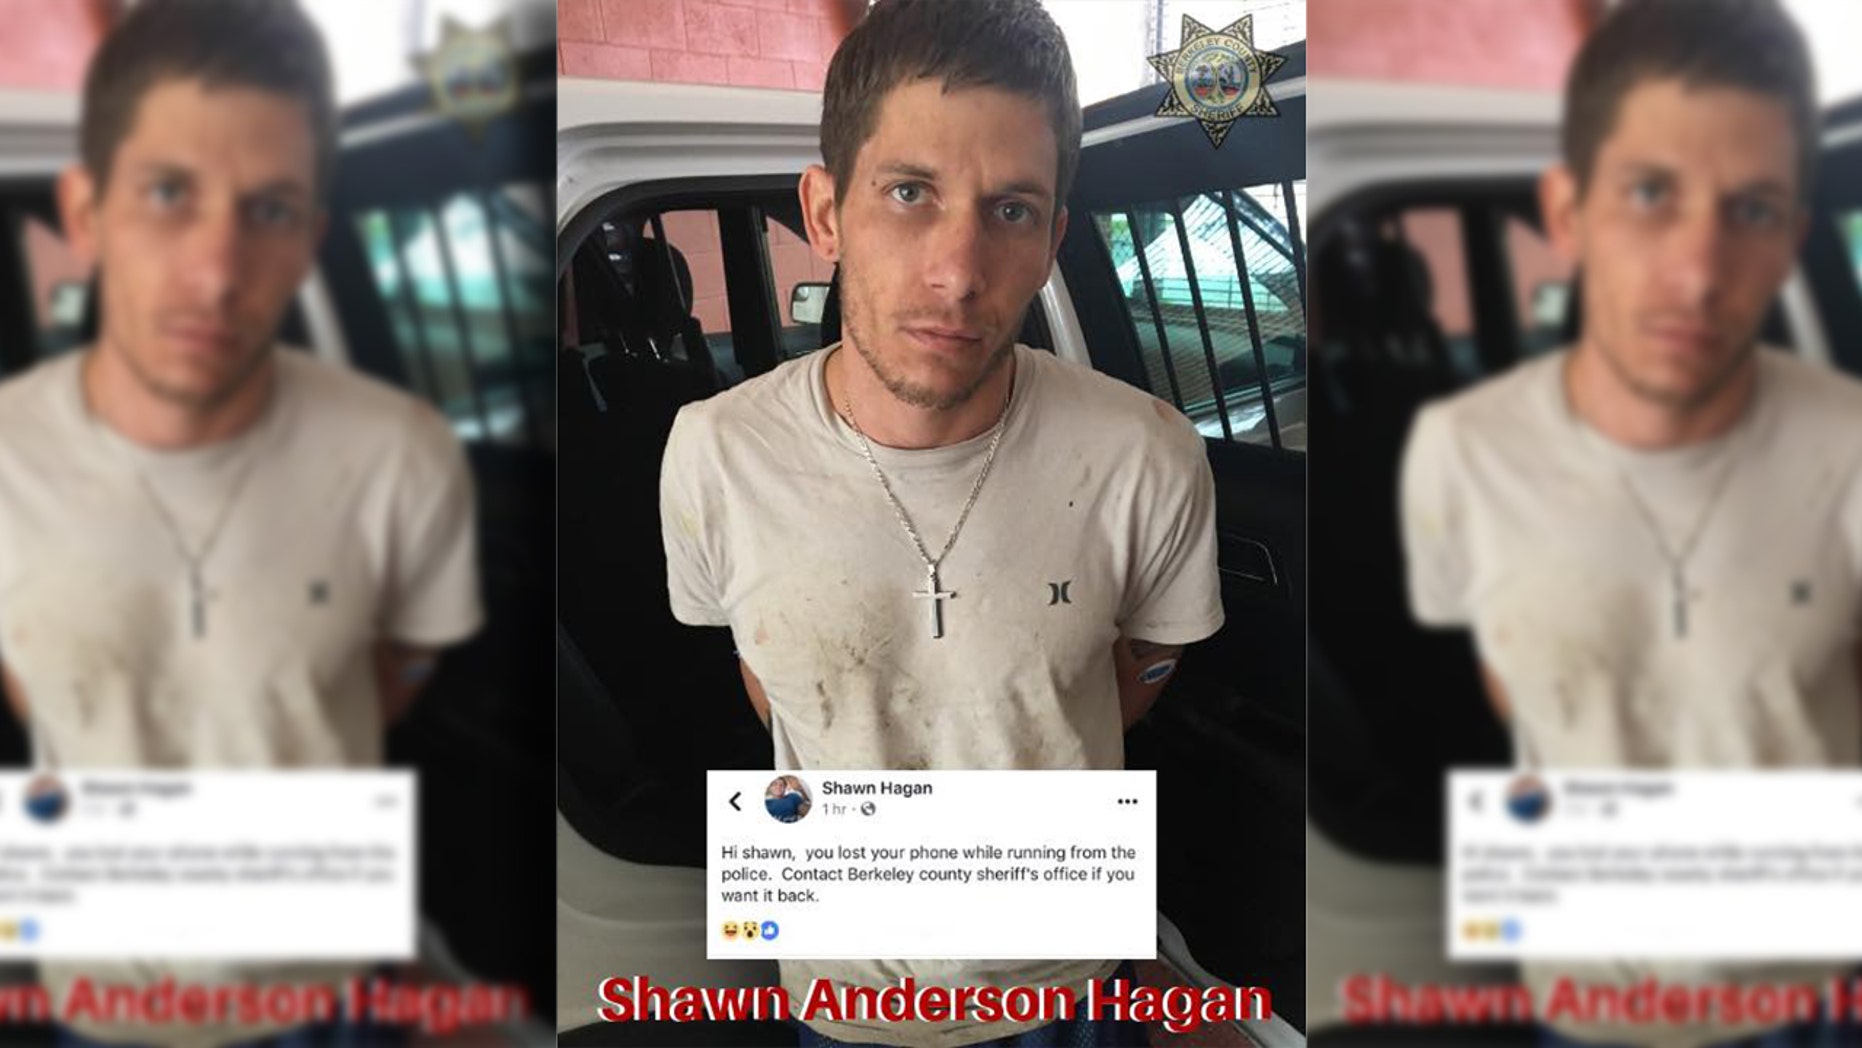 Deputies post message on drug suspect’s Facebook page: ‘you lost your phone while running from the police’